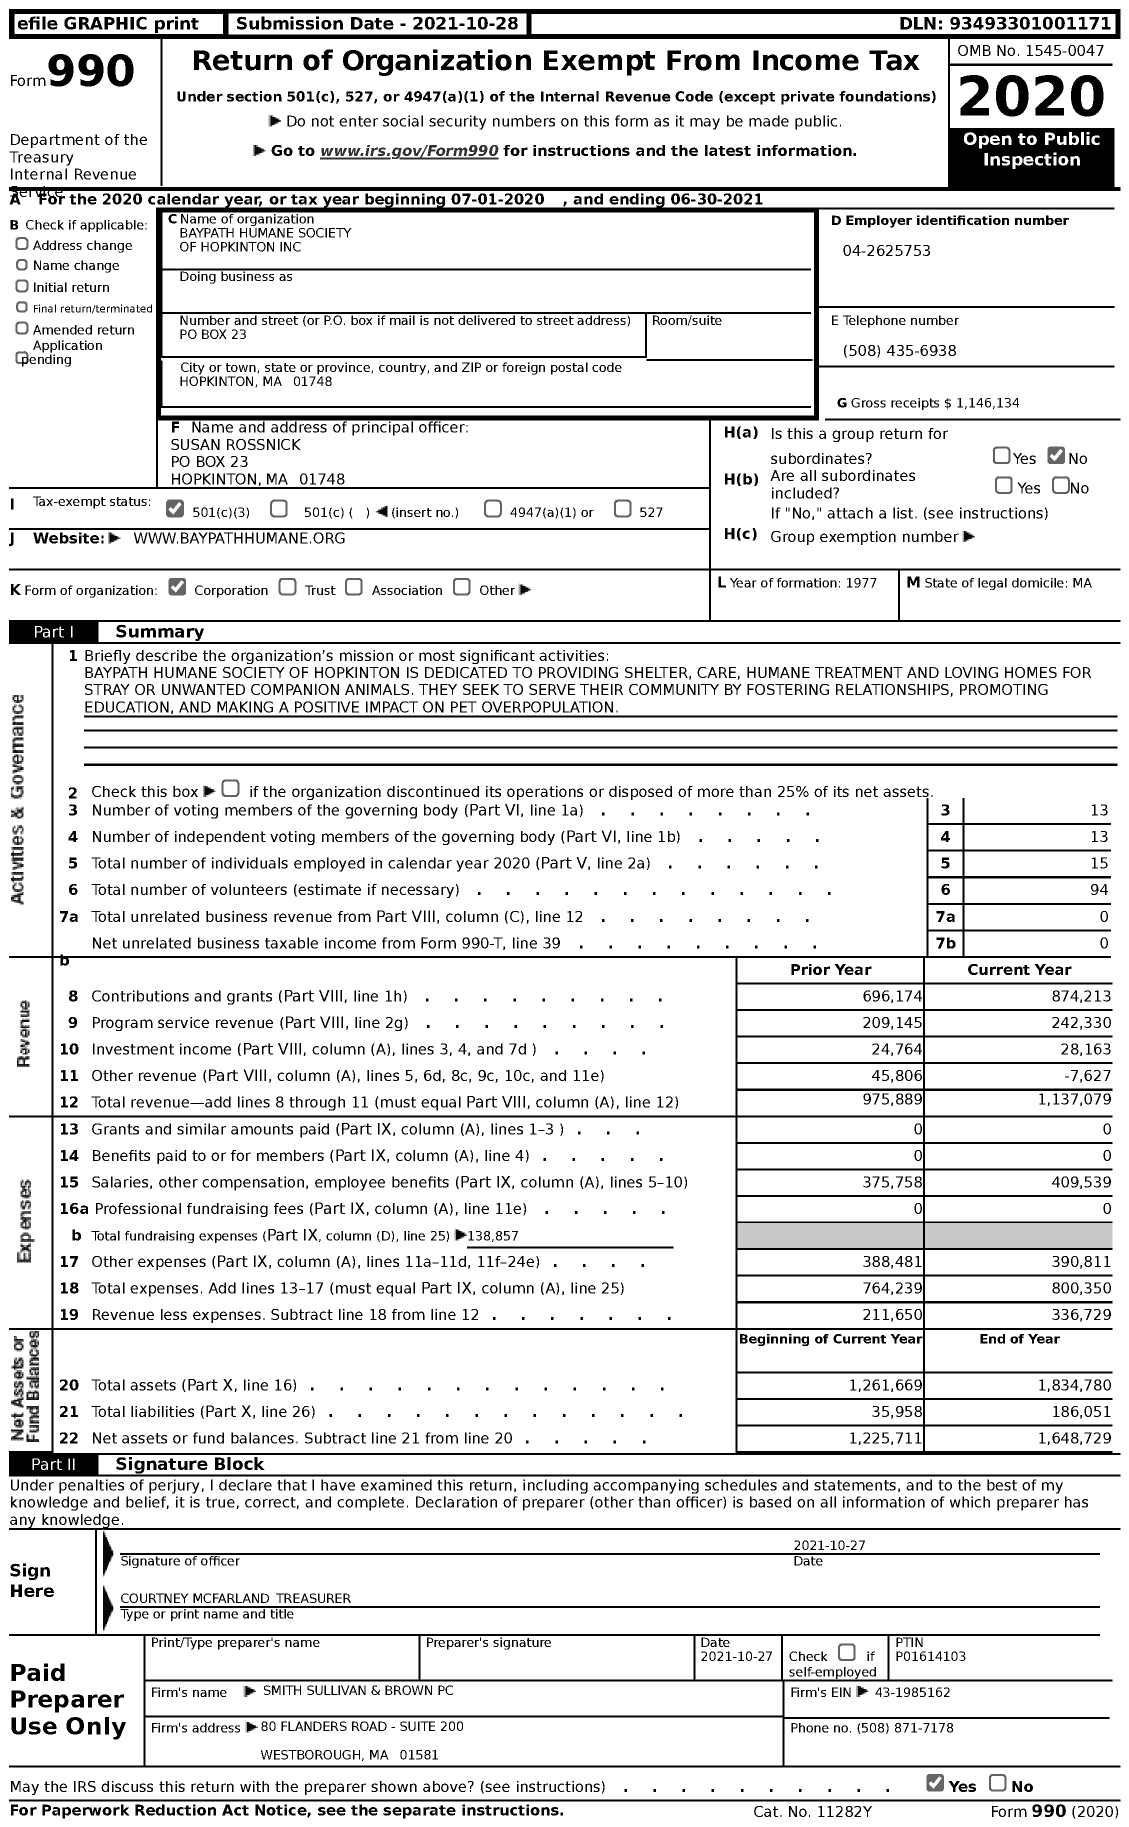 Image of first page of 2020 Form 990 for Baypath Humane Society of Hopkinton